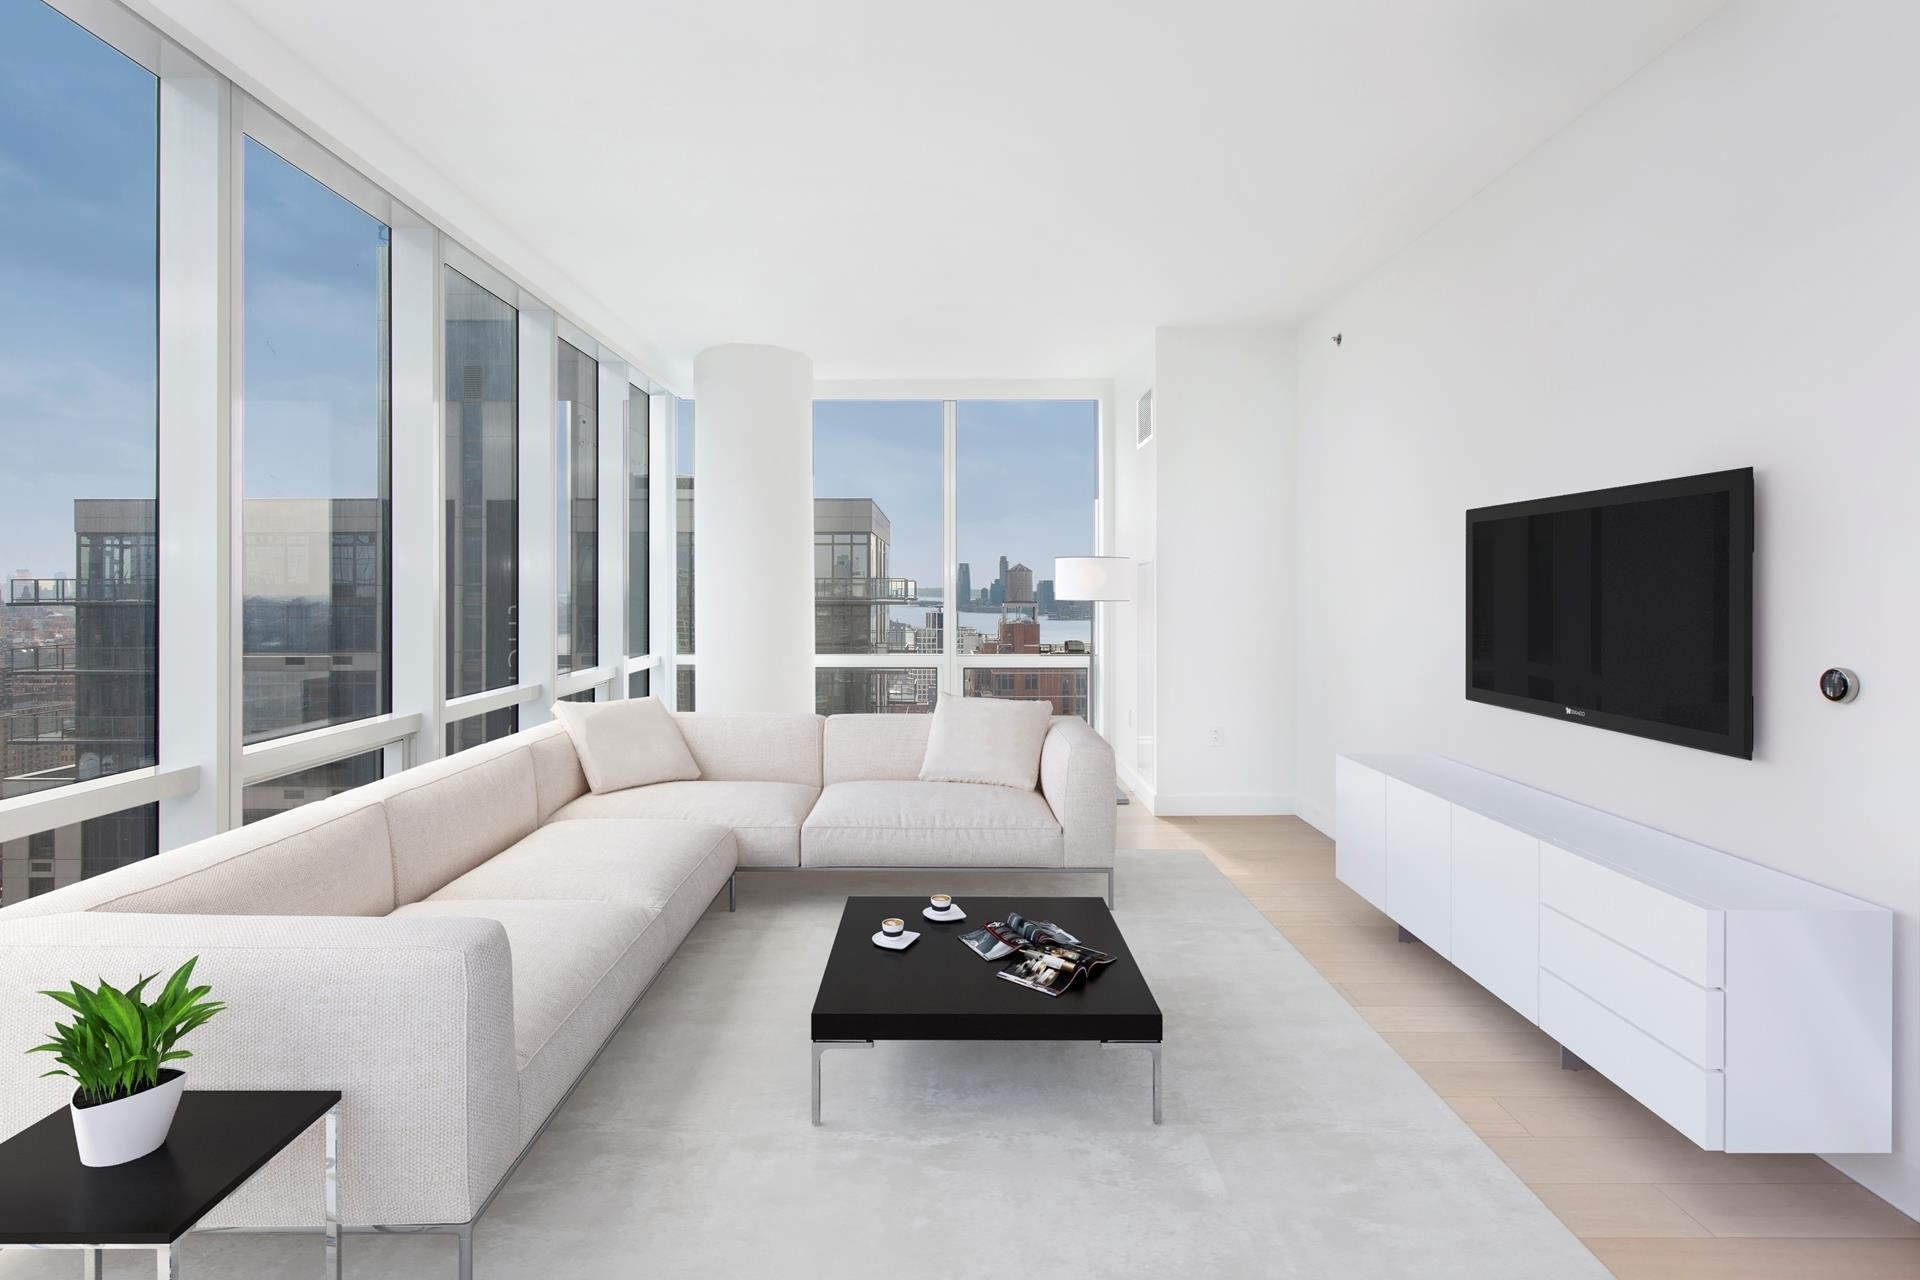 Condominium for Sale at Fifteen Hudson Yards, 15 HUDSON YARDS, 31A Hudson Yards, New York, New York 10001